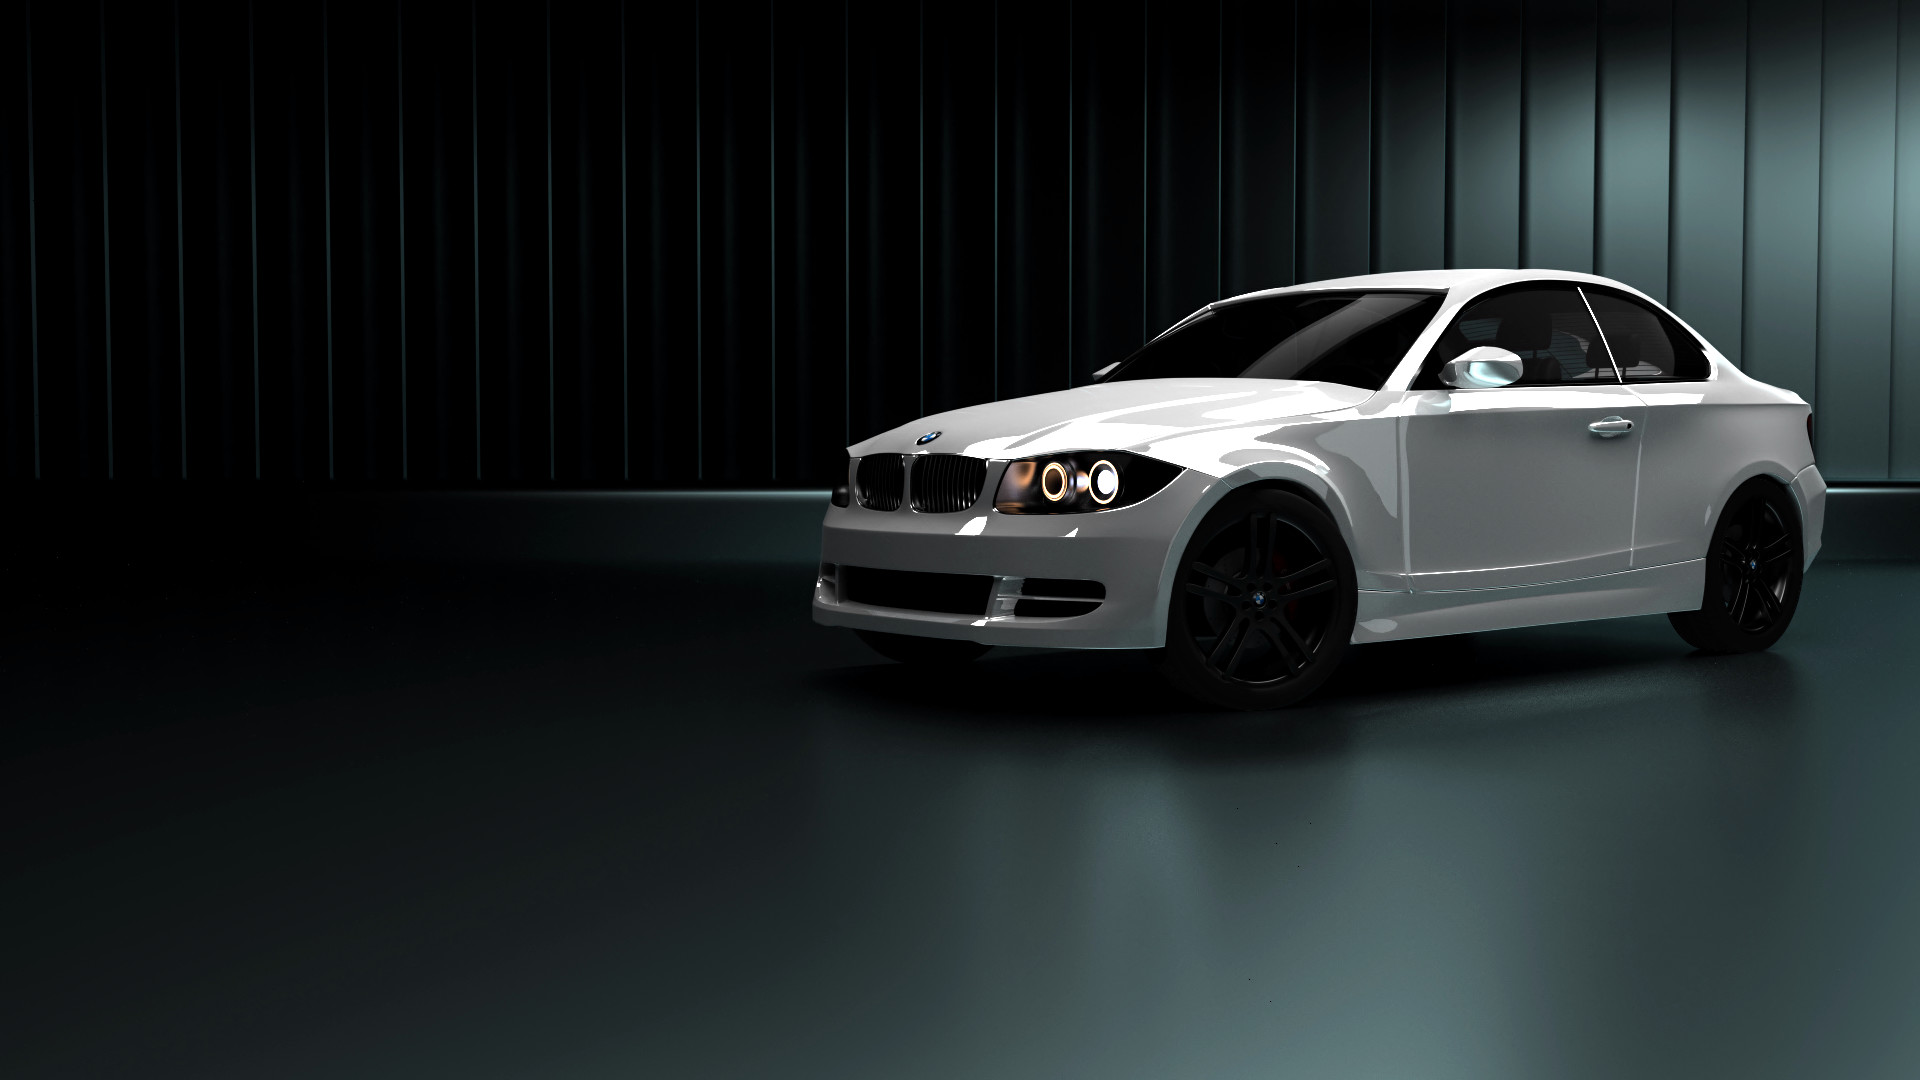 1920x1080 Name: BMW 135i Coupe.png Views: 4844